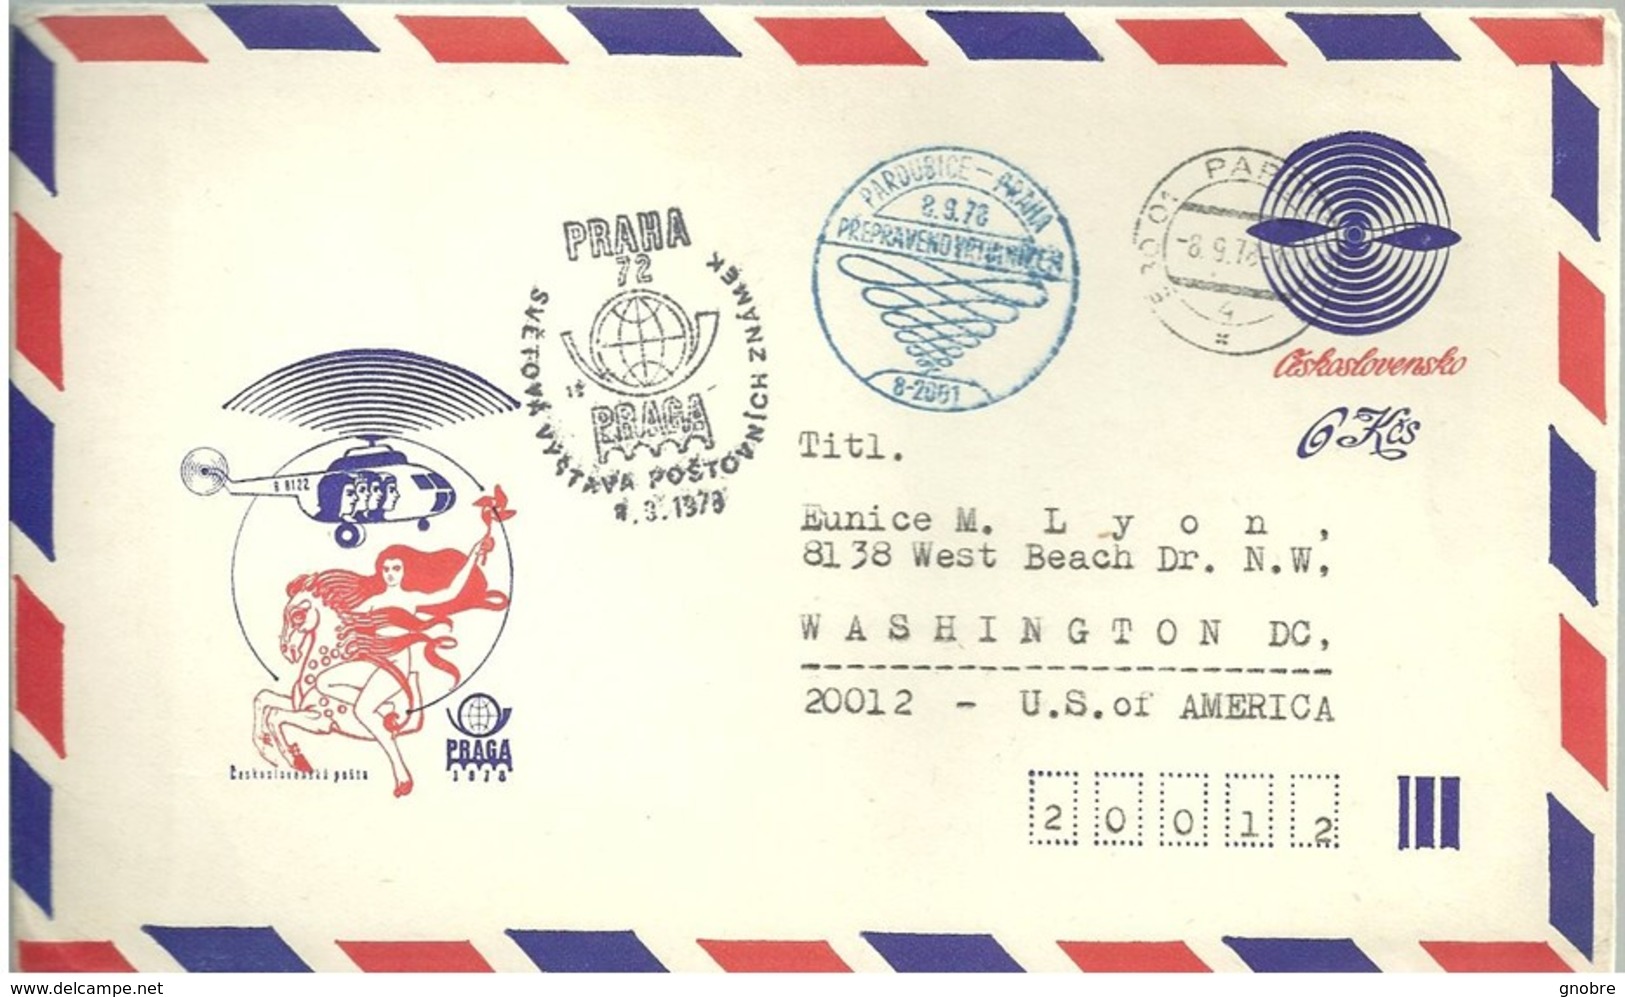 CZECHOSLOVAKIA To USA Cover Prepaid Stationery Sent In 1978 - Great Cancel - Woman Helicopter (GN 0278) - Briefe